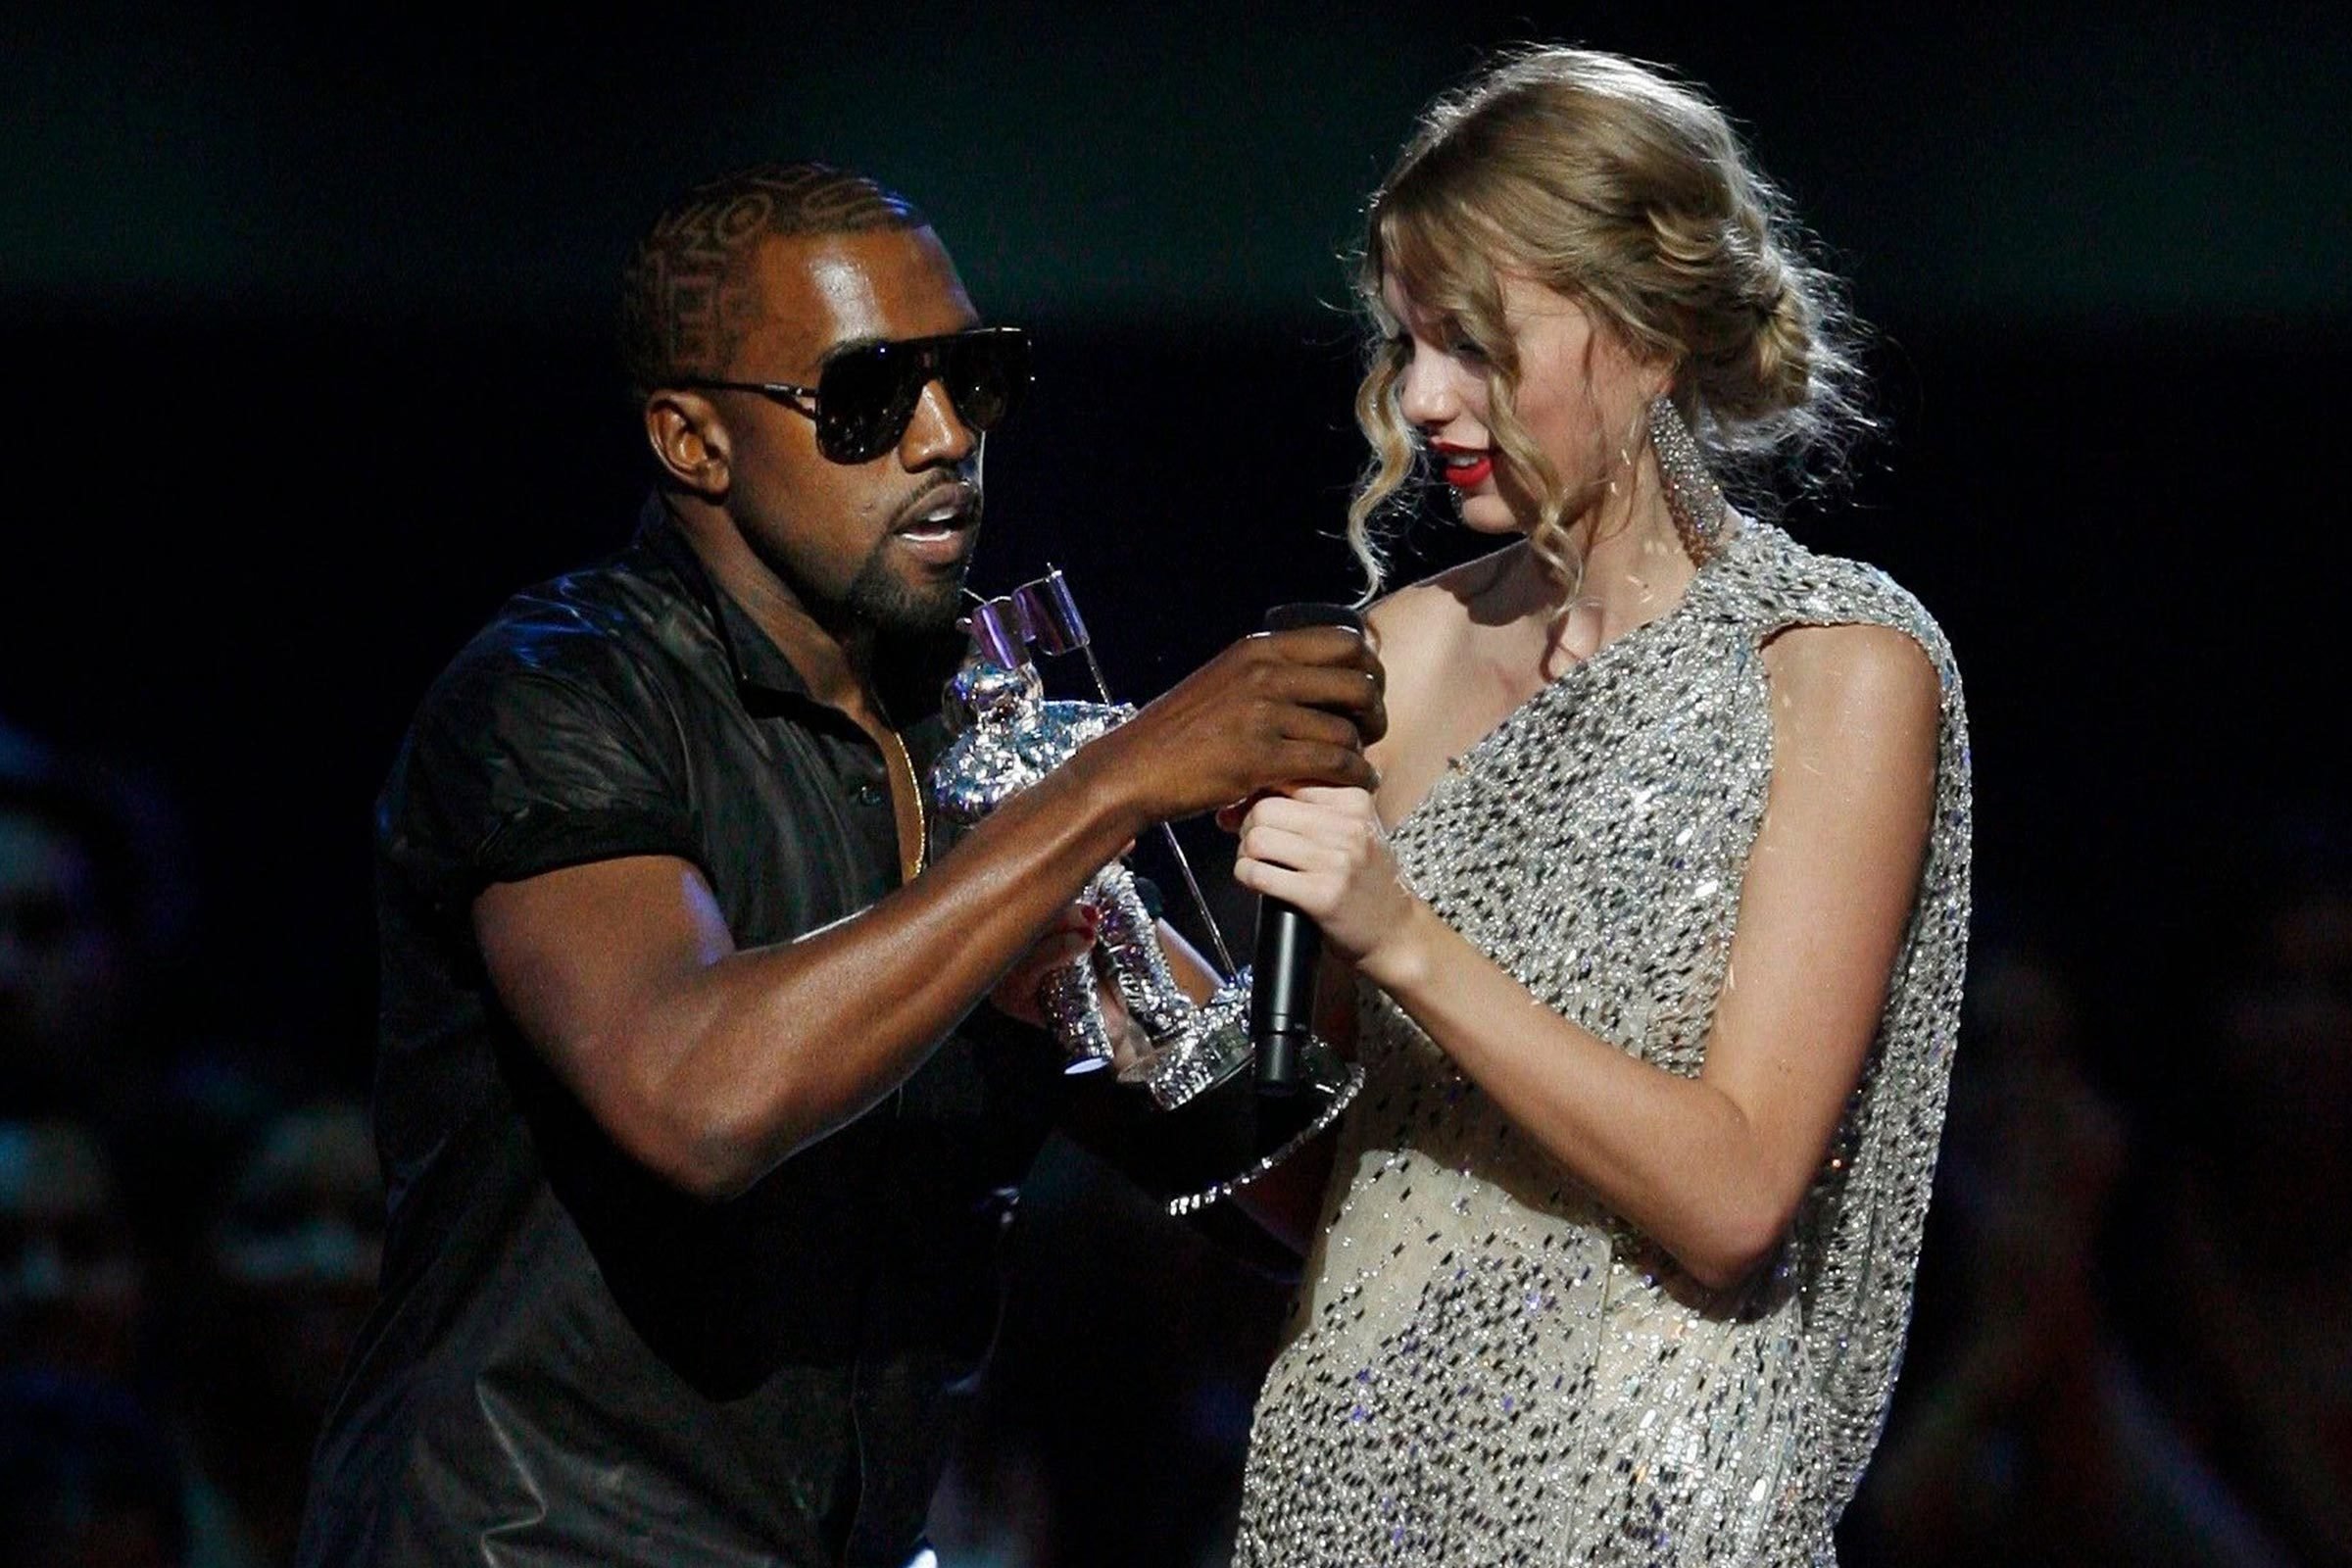 Award Show Scandals That Rocked the Industry Reader's Digest